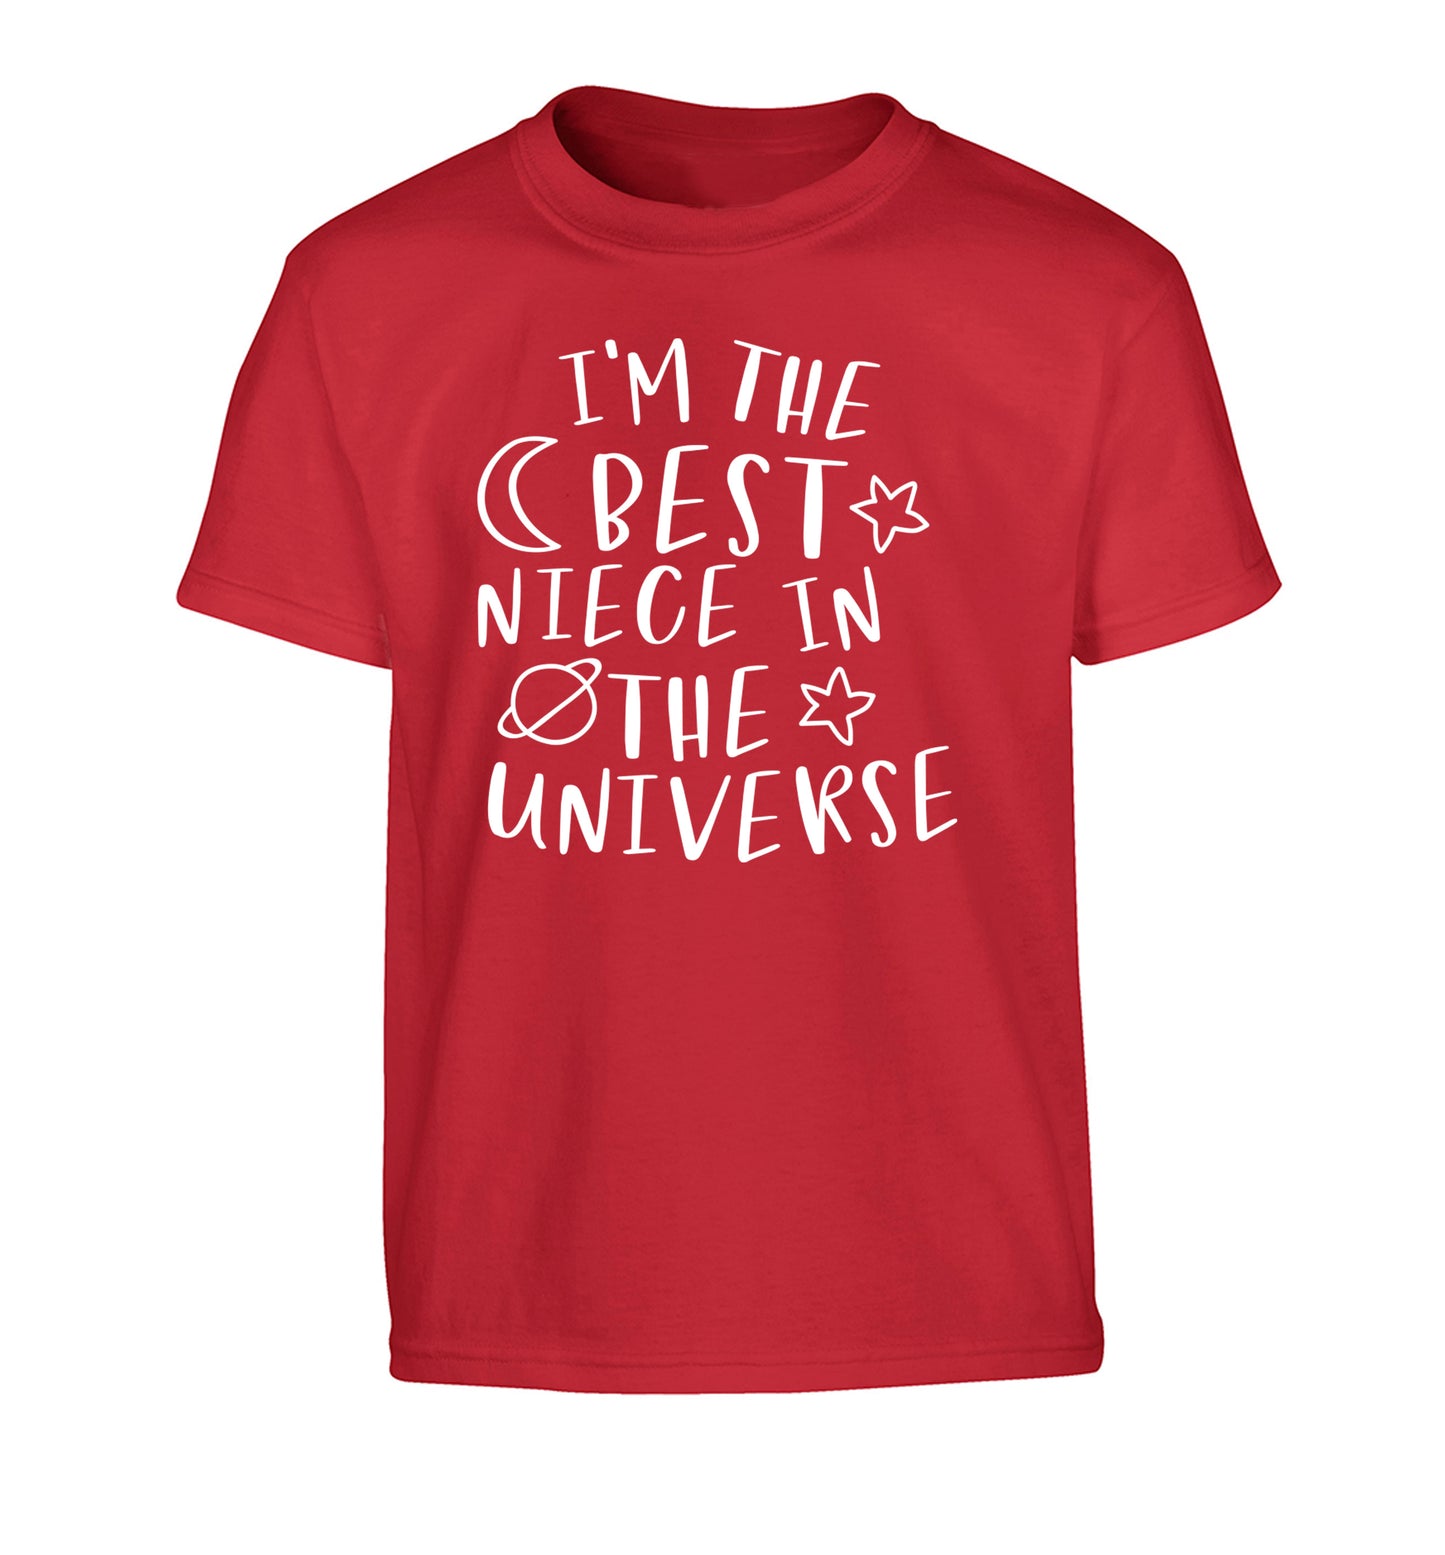 I'm the best niece in the universe Children's red Tshirt 12-13 Years